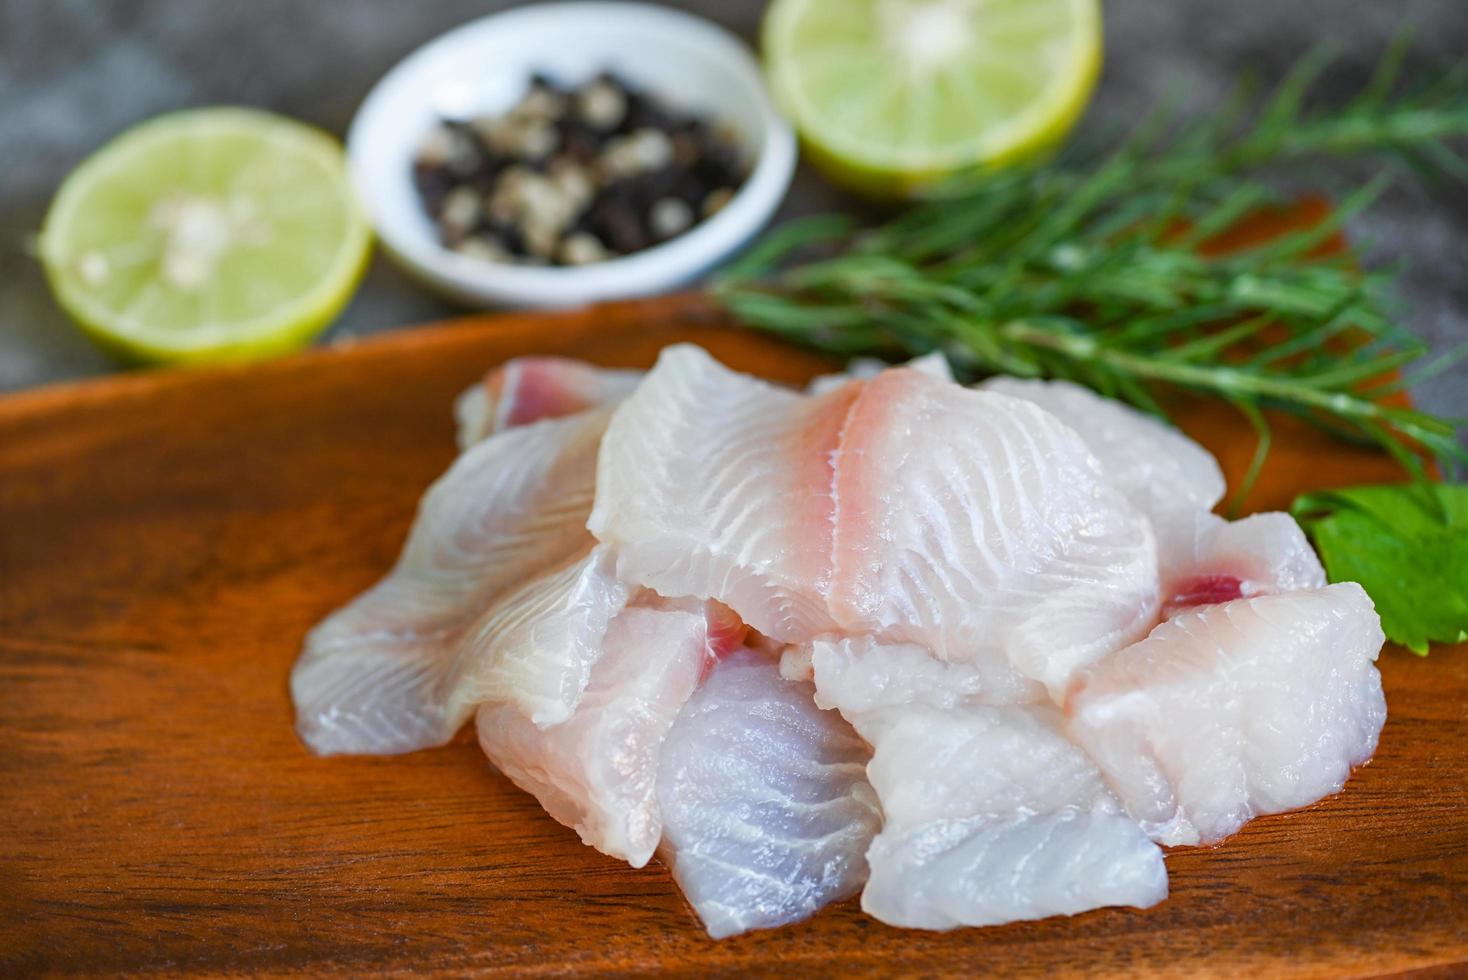 fresh raw pangasius fish fillet with, meat dolly fish tilapia striped catfish, fish fillet on wooden board with ingredients celery for cooking photo